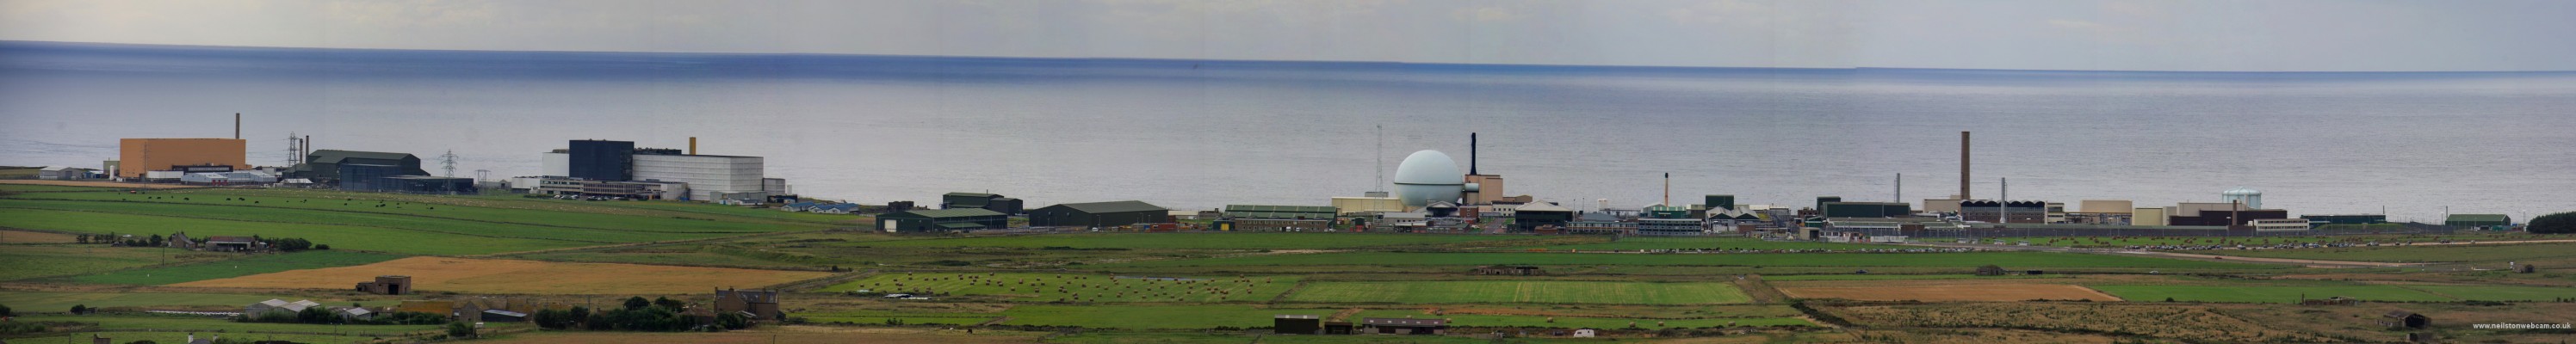 Dounraey Nuclear Site
Panoramic view of the Dounraey Nuclear test site.  The orange coloured building on the left is the Shore Test facility (STF) of the Vulcan Reactor Test Establishment of the Roytal Navy.  The large white building to the right is the Prototype Fast Reactor and the classic Dome in the centre is the Dounraey Fast Reactor.  The two fast reactors are now decomissioned but the STF is still in use and has the Royal Navy Core H Submarine Reactor under test.
